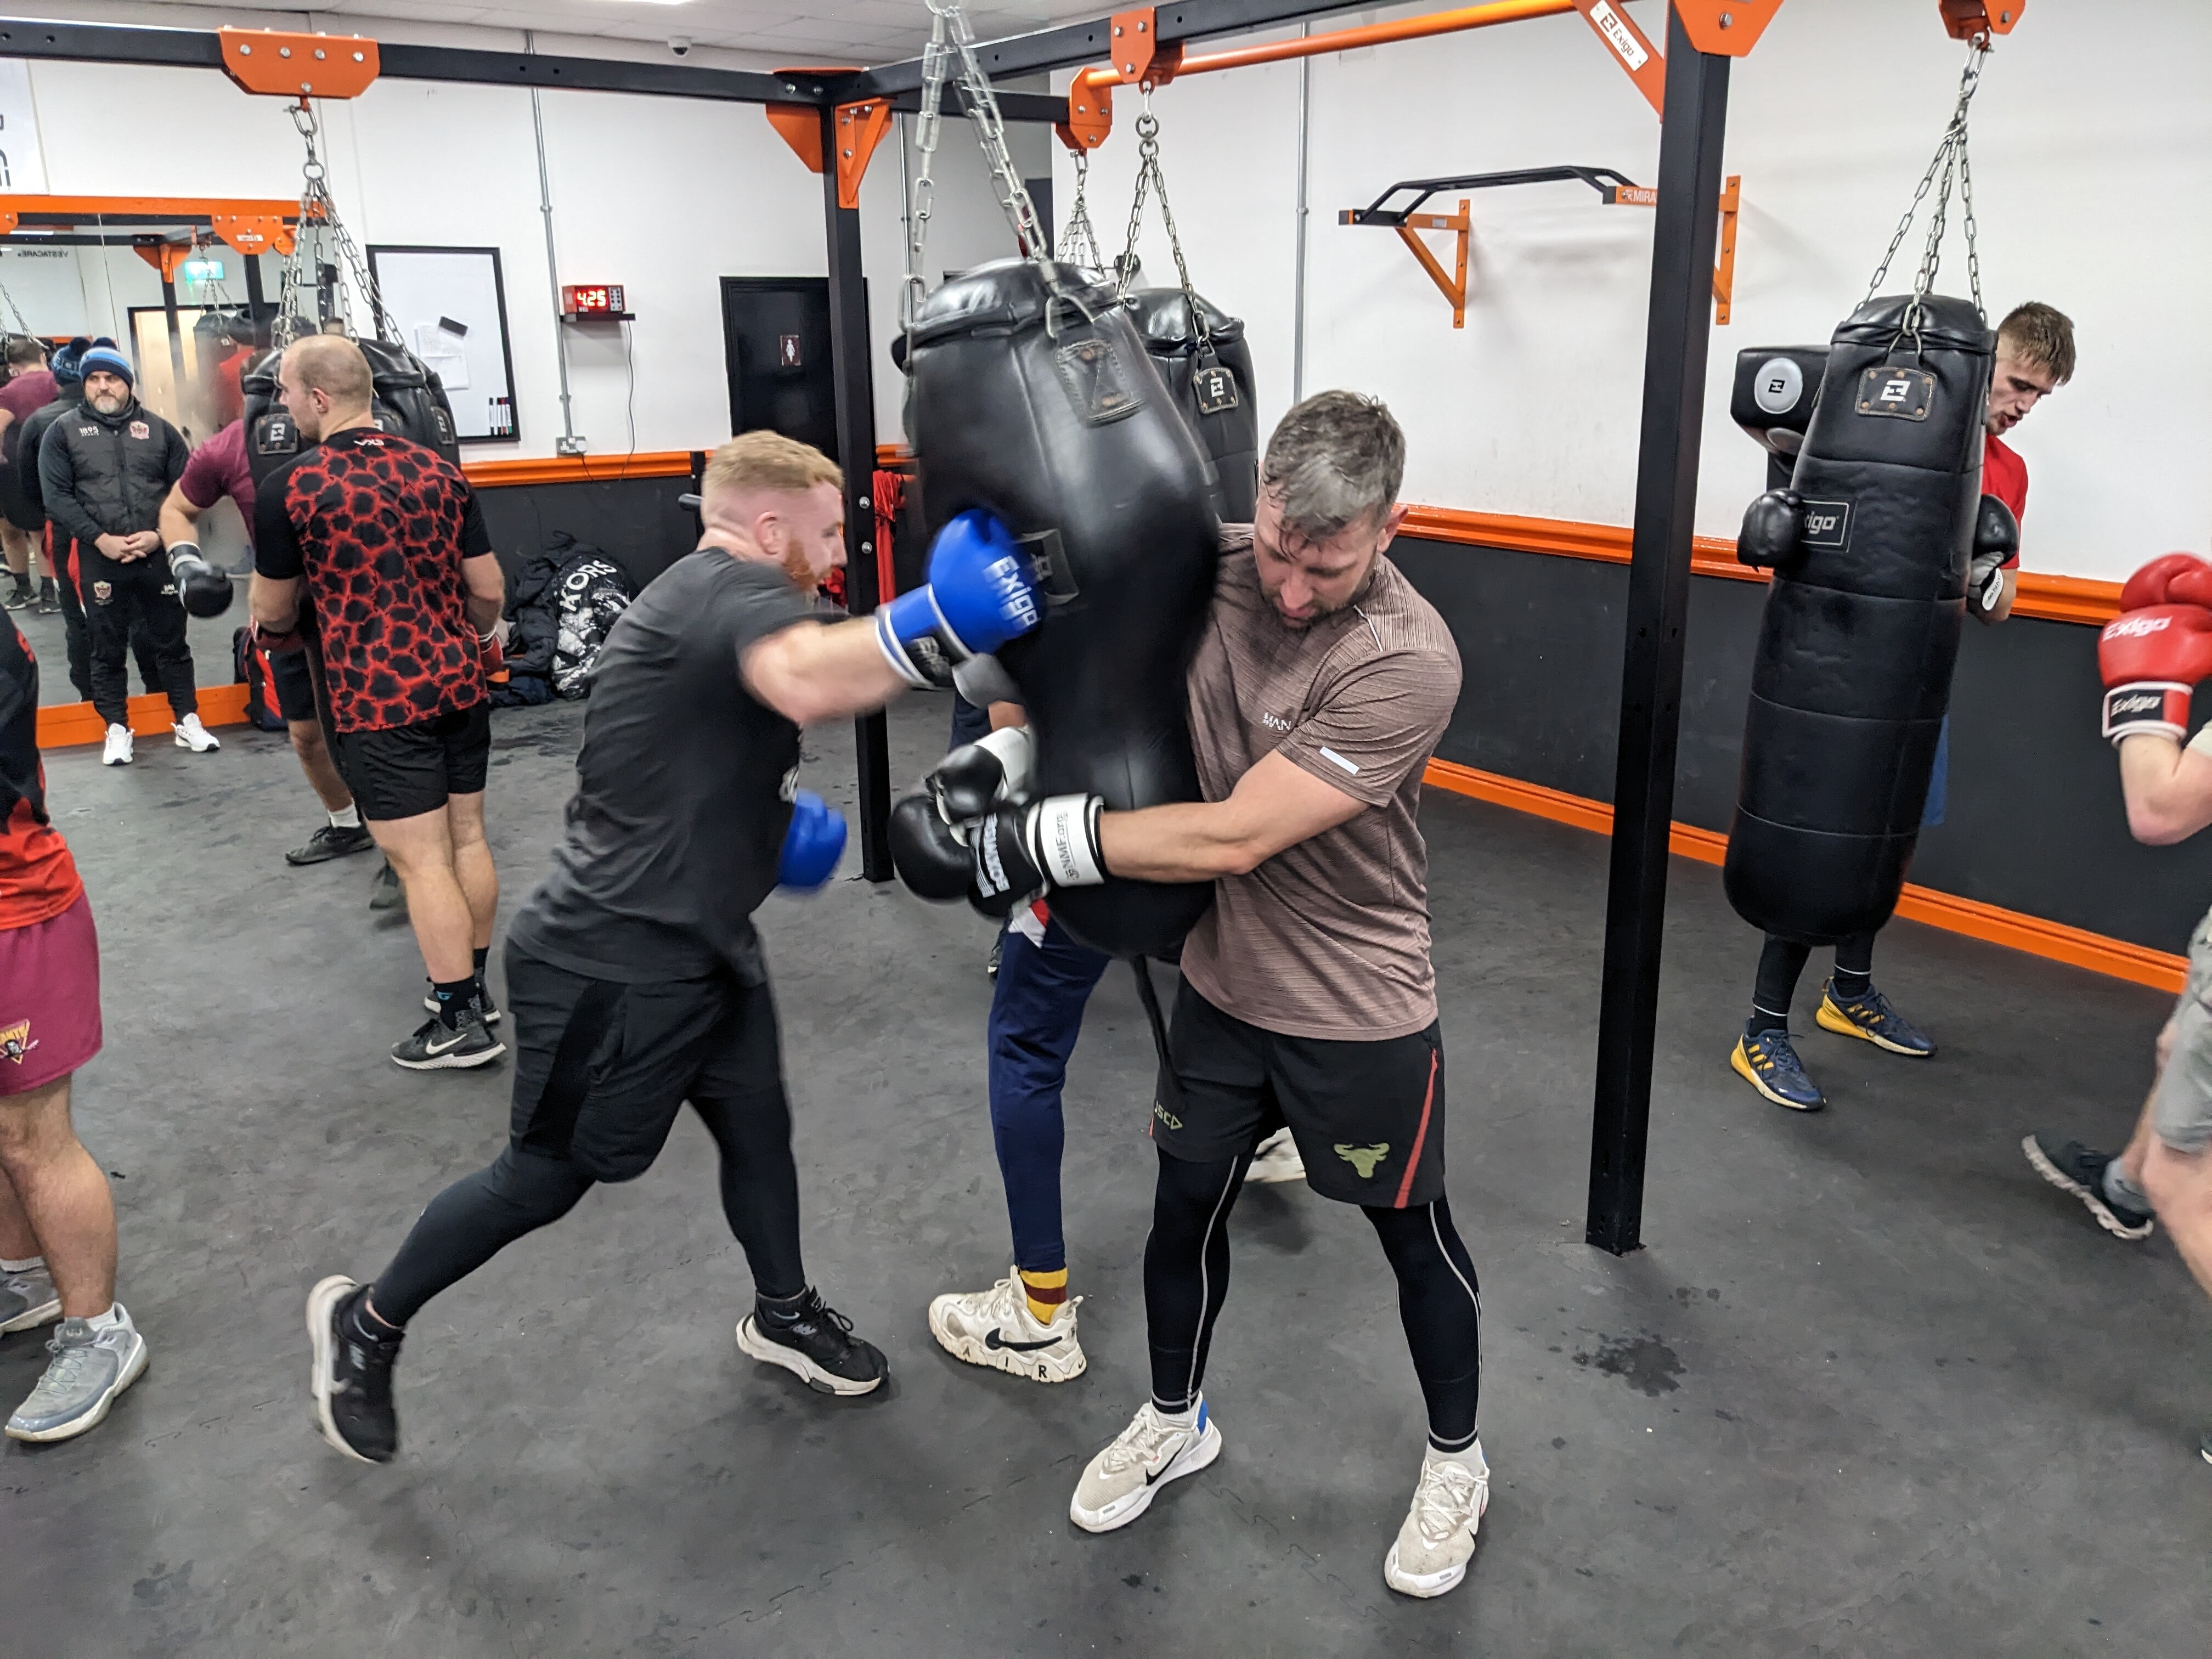 Lewis Sheridan and Greg McNally hard at work in the boxing gym